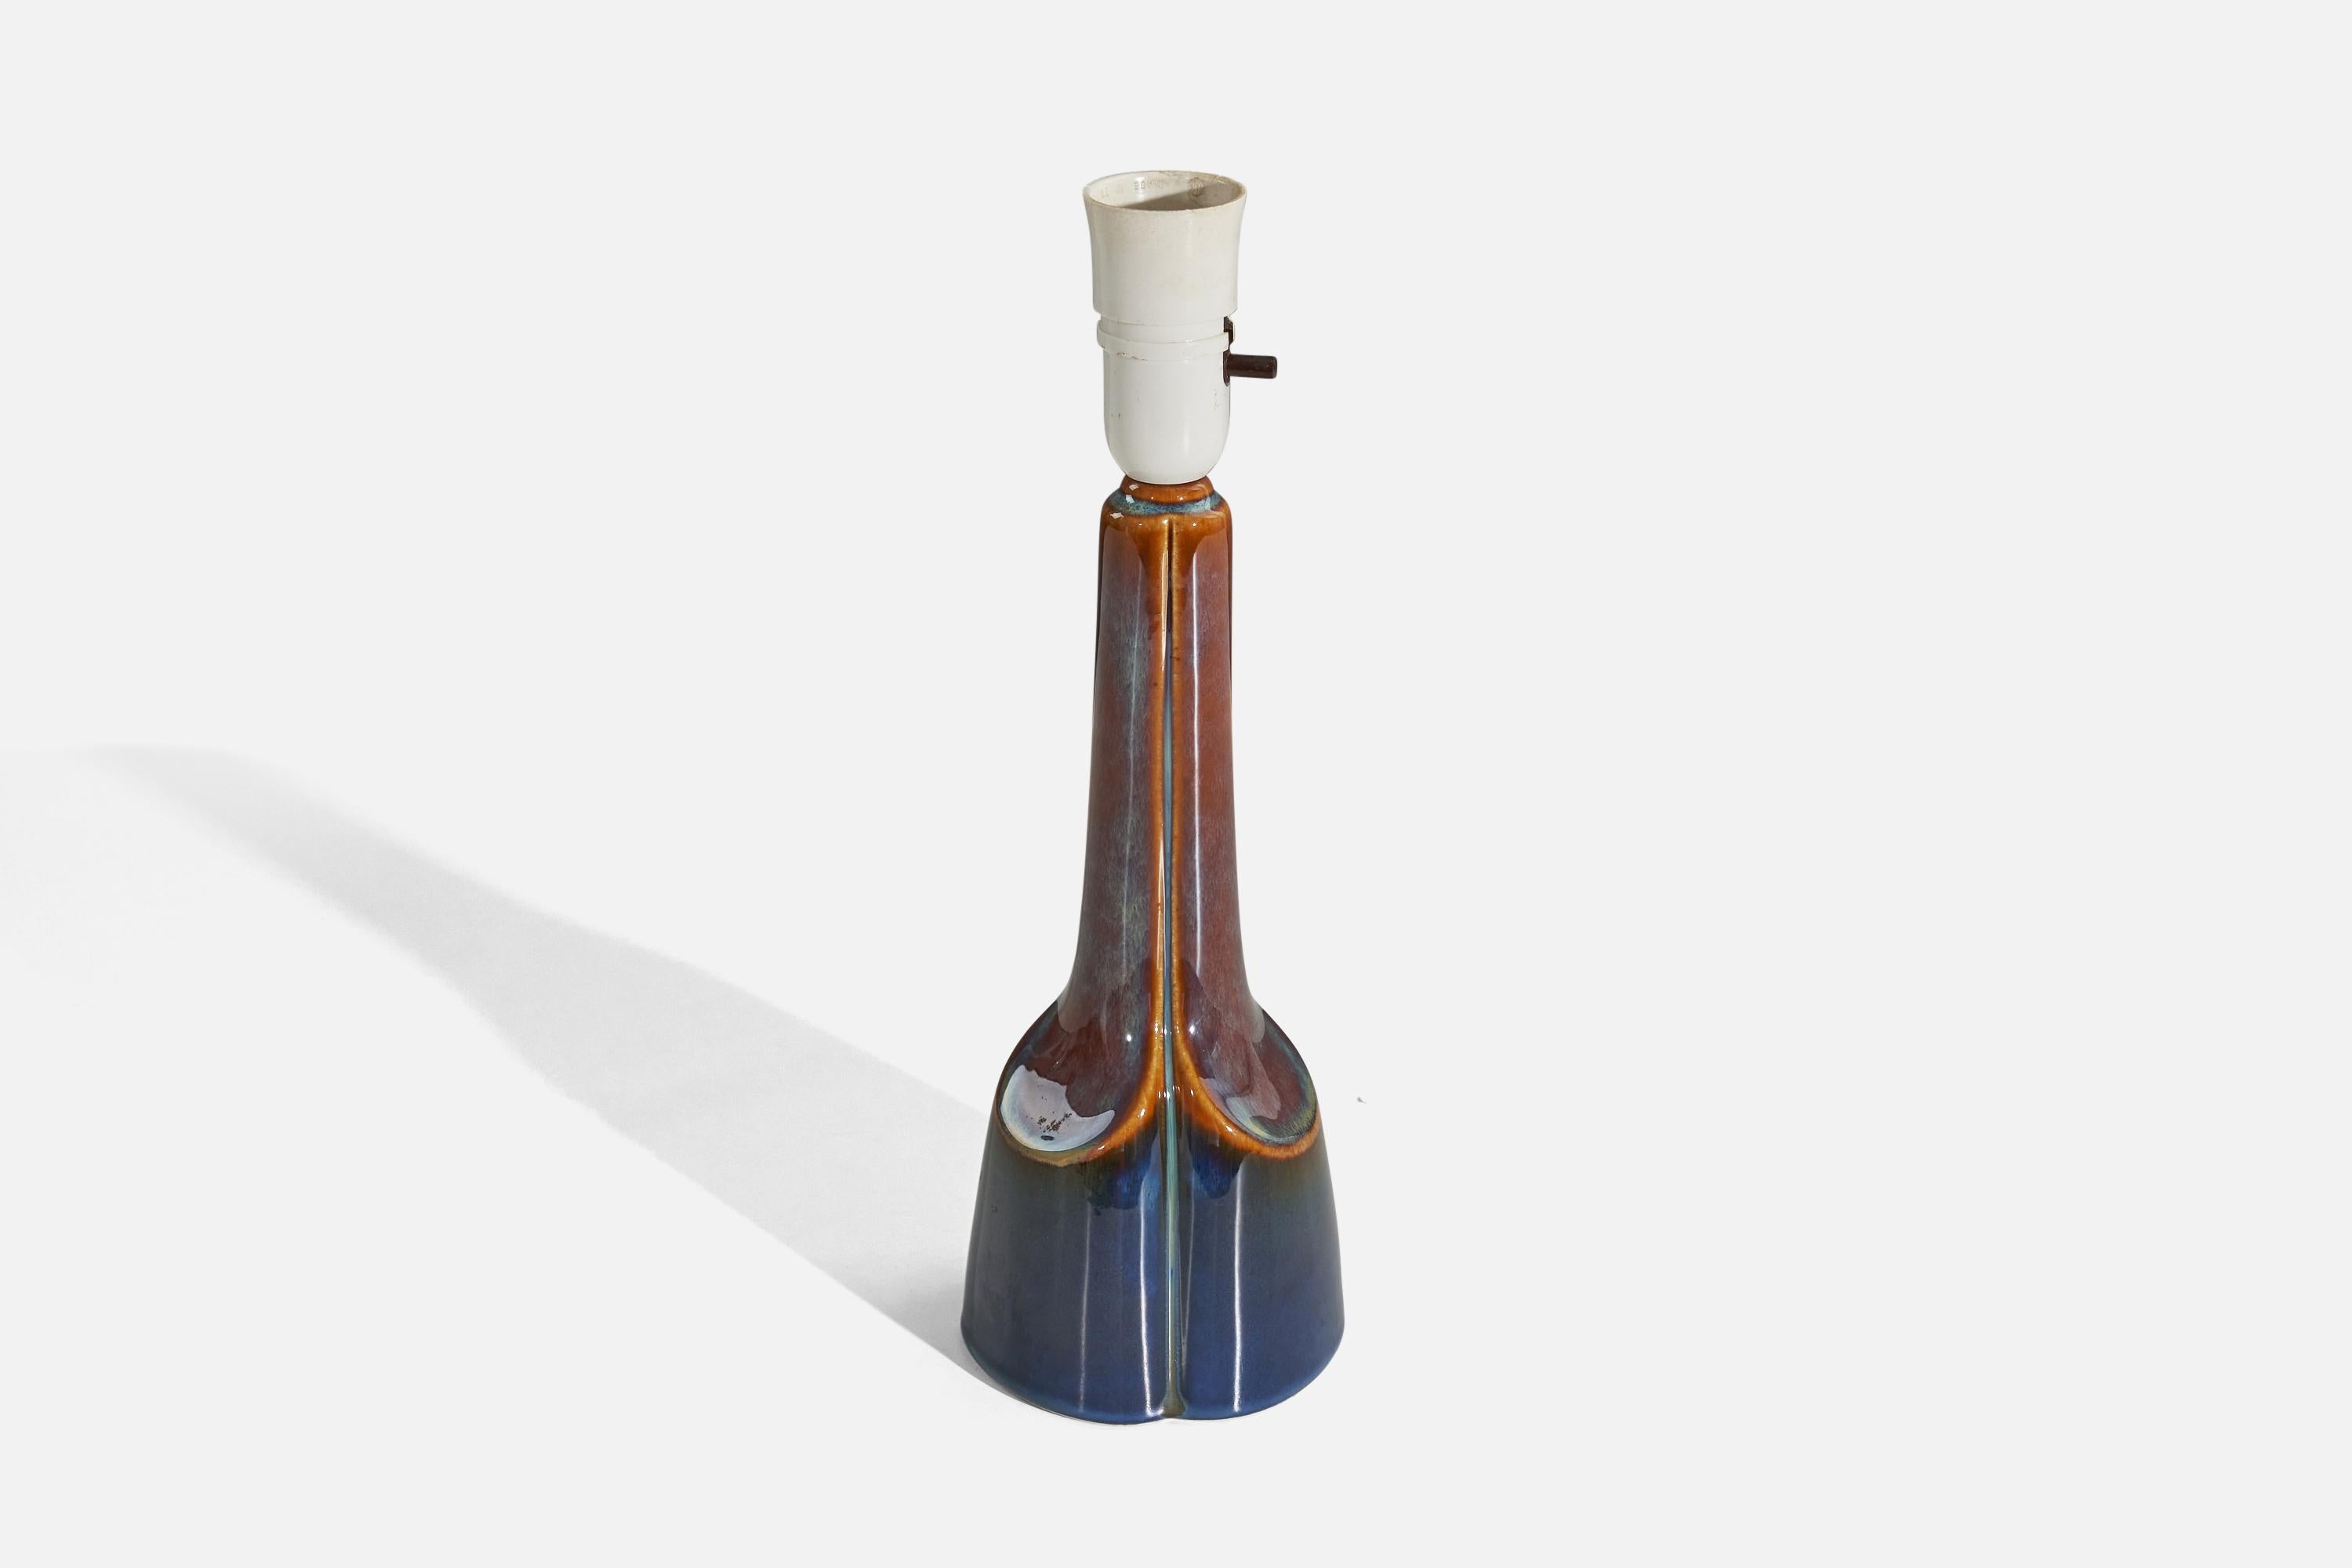 Søholm Stentøj, Table Lamp, Blue And Brown-Glazed Stoneware, Denmark, c. 1960s In Good Condition For Sale In High Point, NC